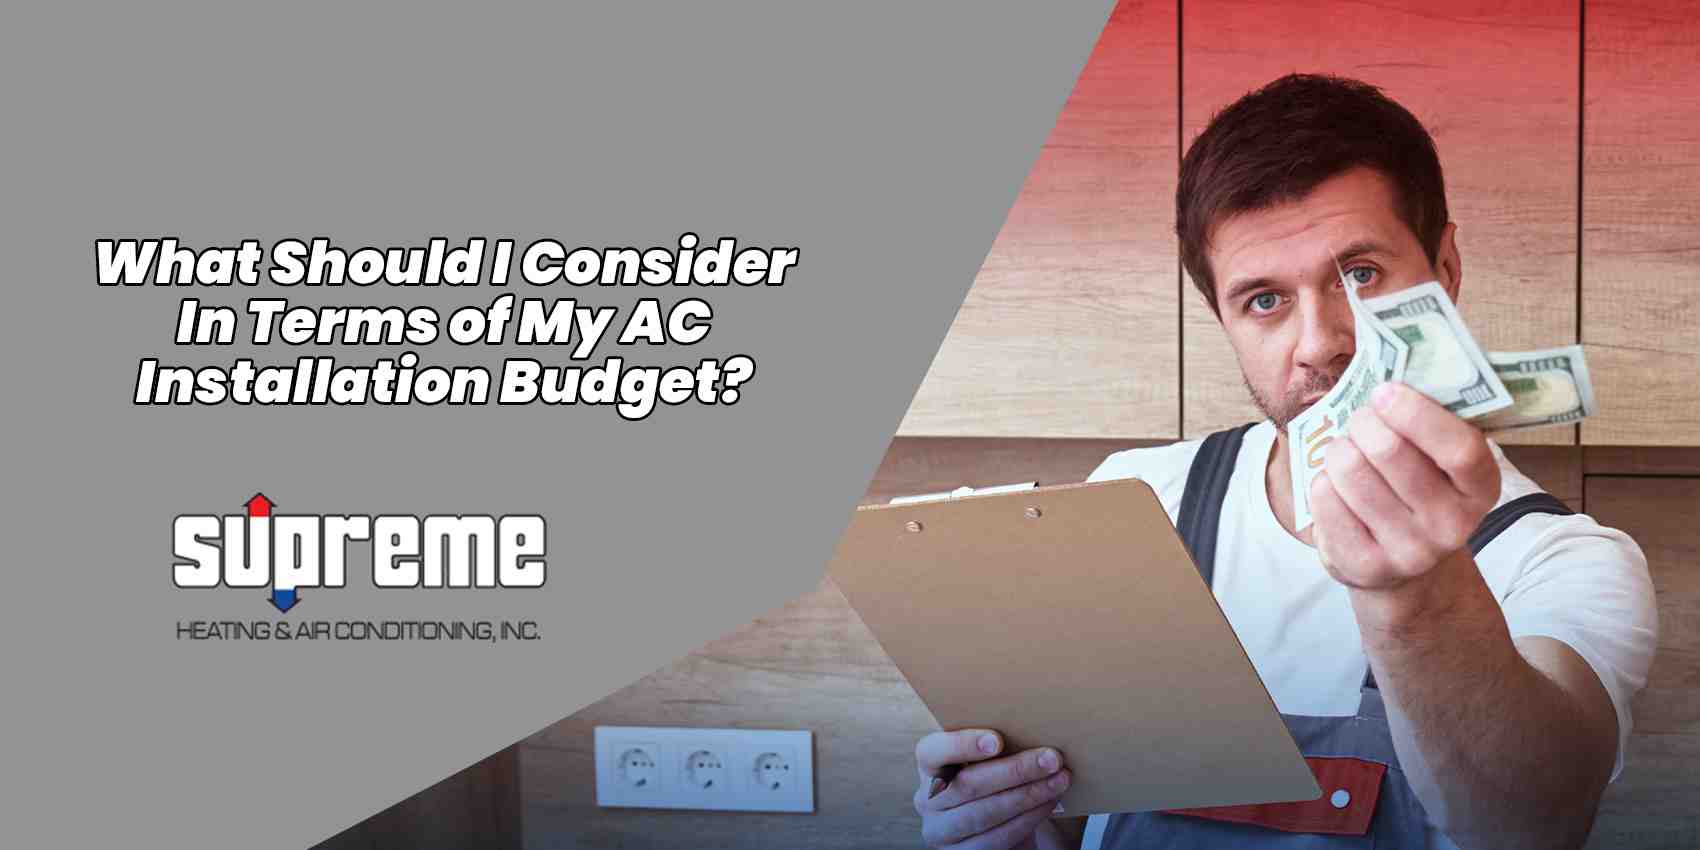 What Should I Consider In Terms of My AC Installation Budget?